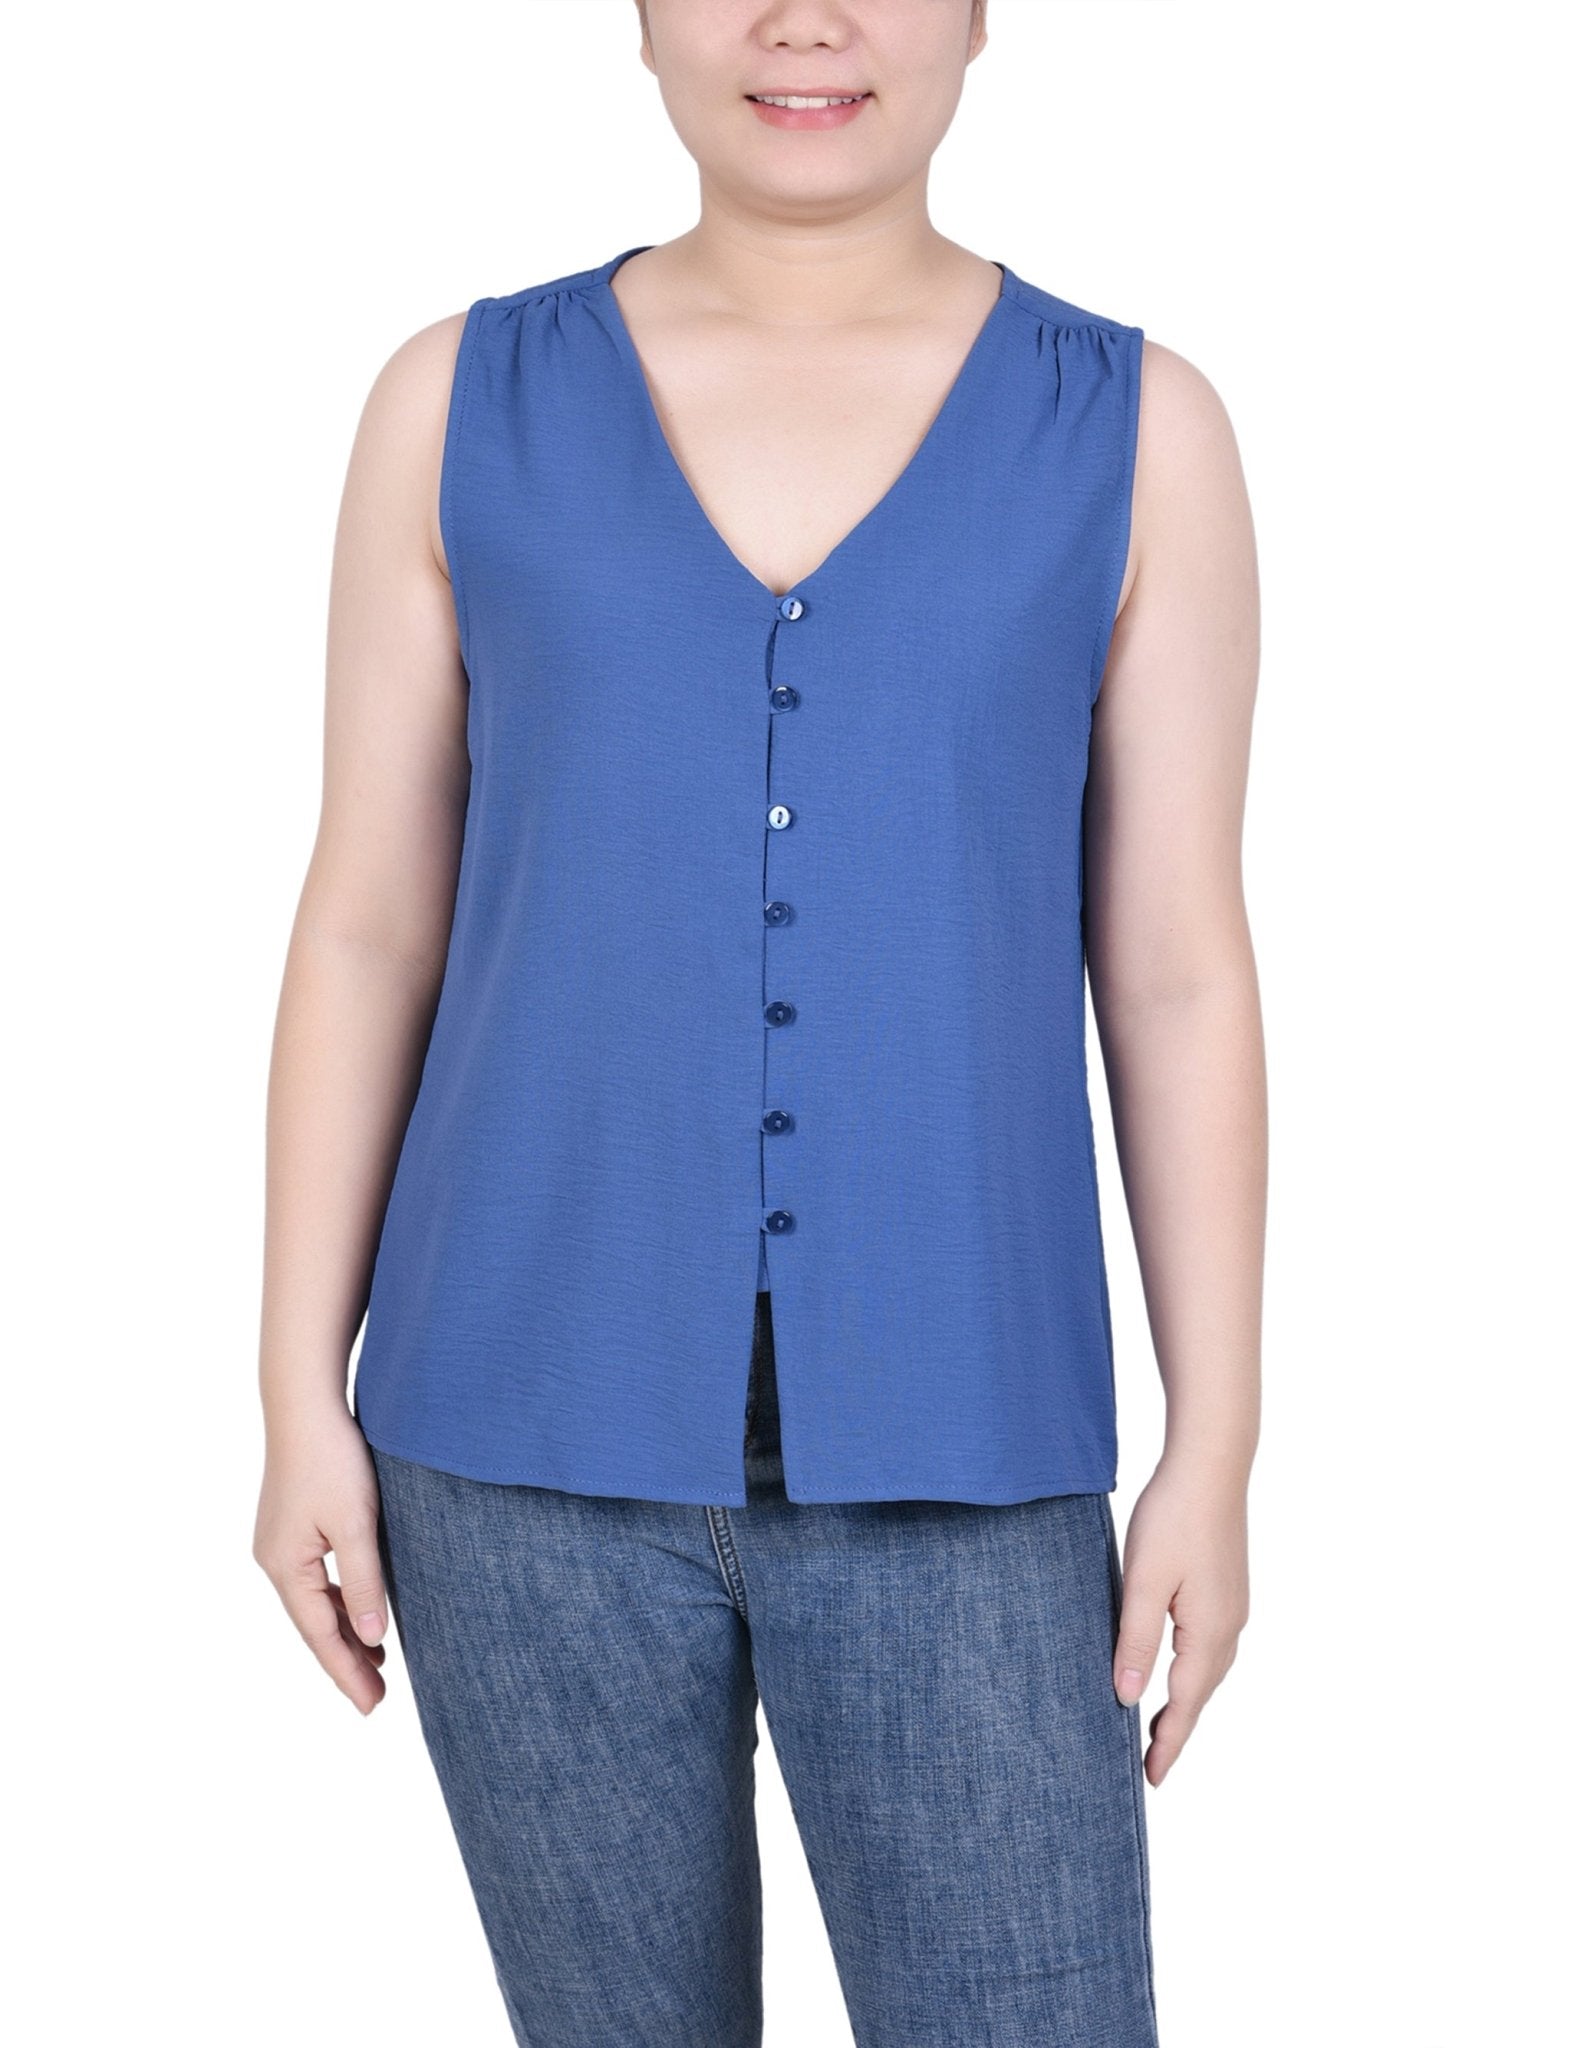 NY Collection Sleeveless Button Front Blouse - Petite - DressbarnShirts & Blouses